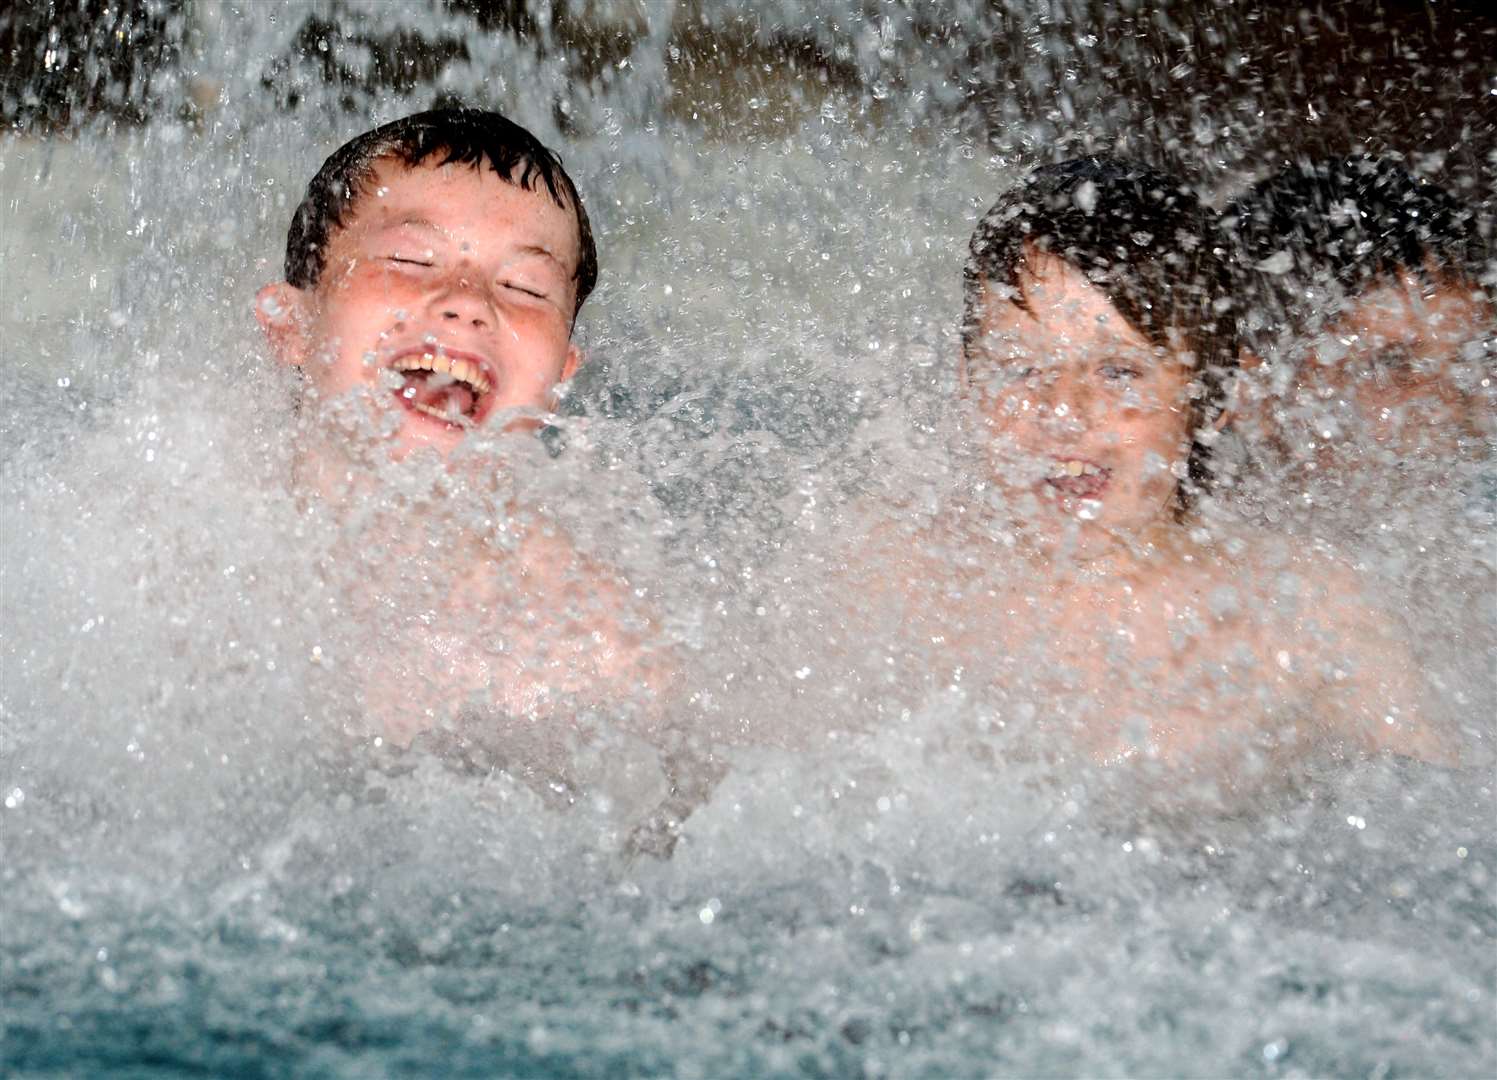 Along with gyms, swimming pools could be reopened to the public in the middle of September.